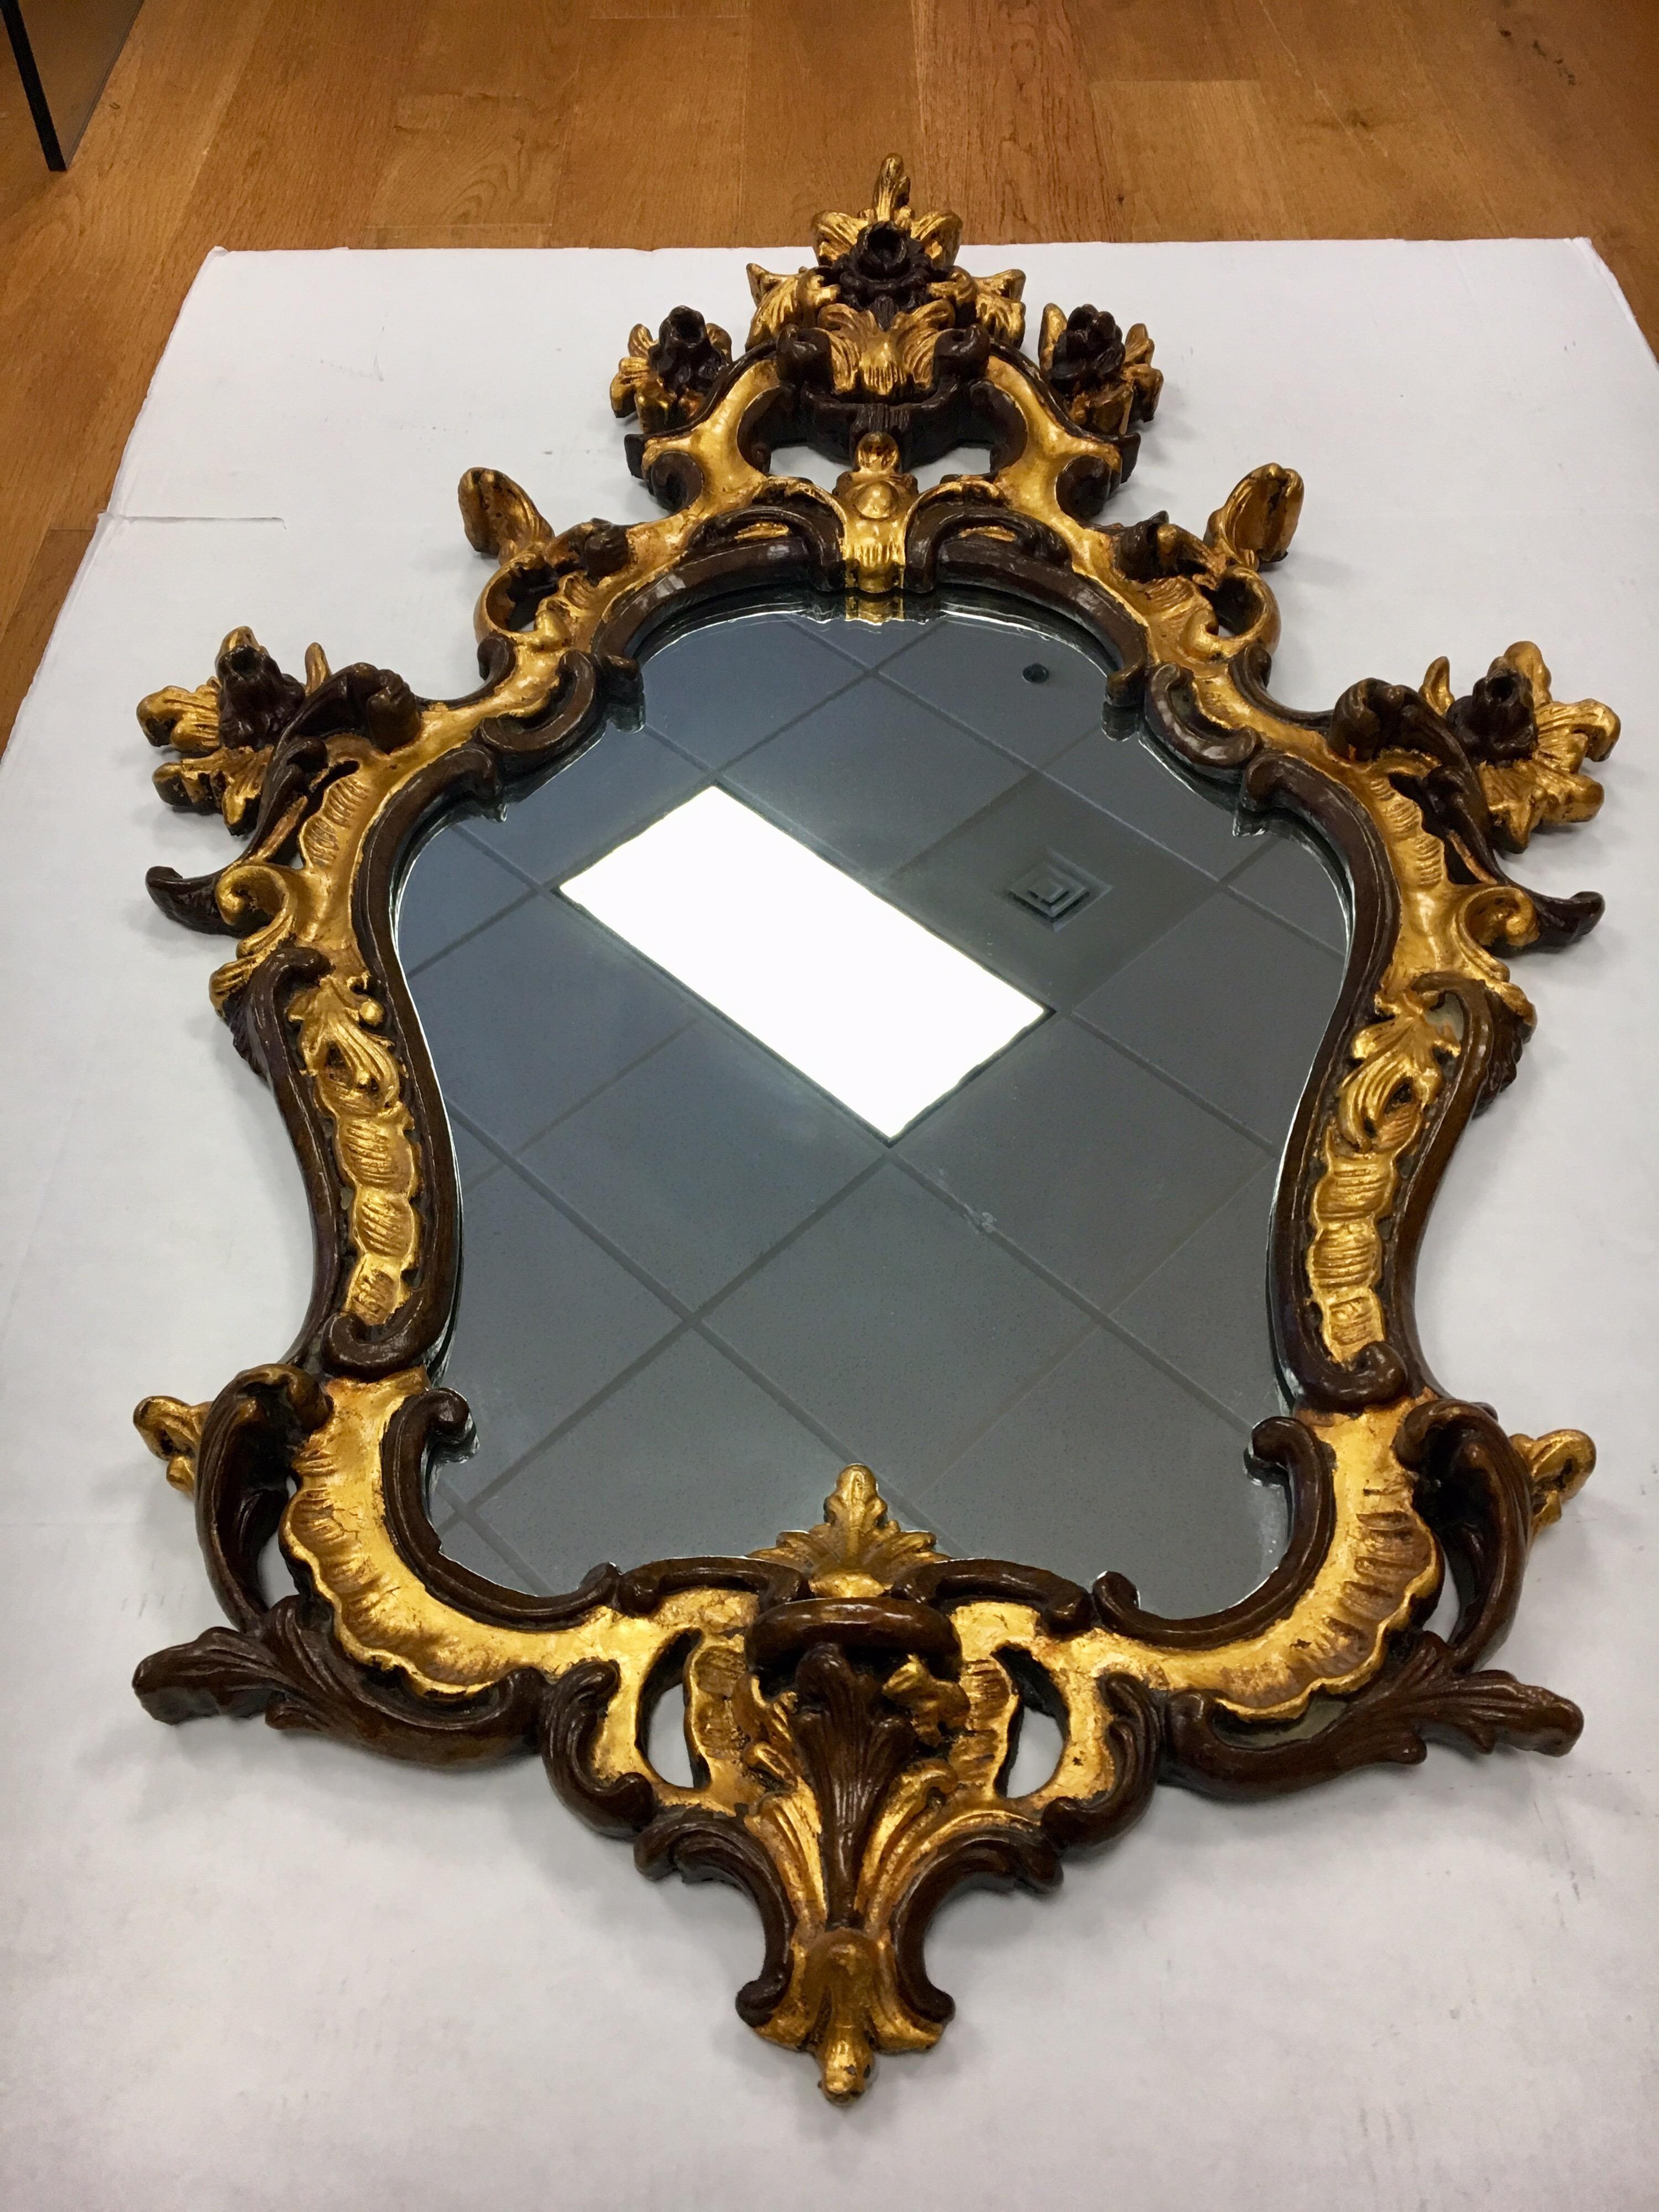 20th Century Rococo Style Ornate Carved Giltwood Shield Wall Mirror